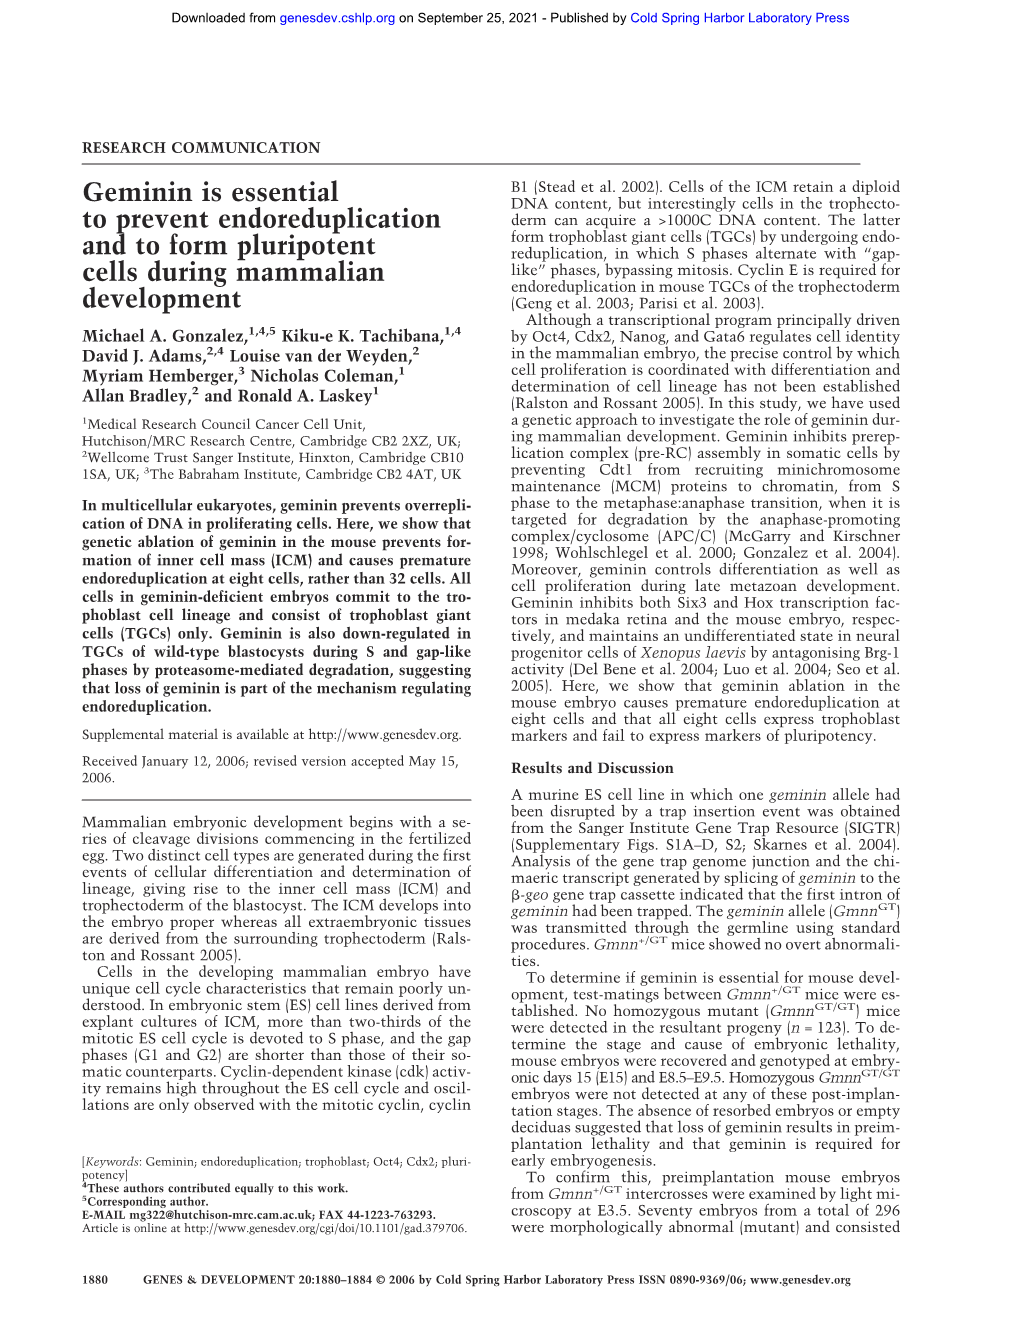 Geminin Is Essential to Prevent Endoreduplication and to Form Pluripotent Cells During Mammalian Development